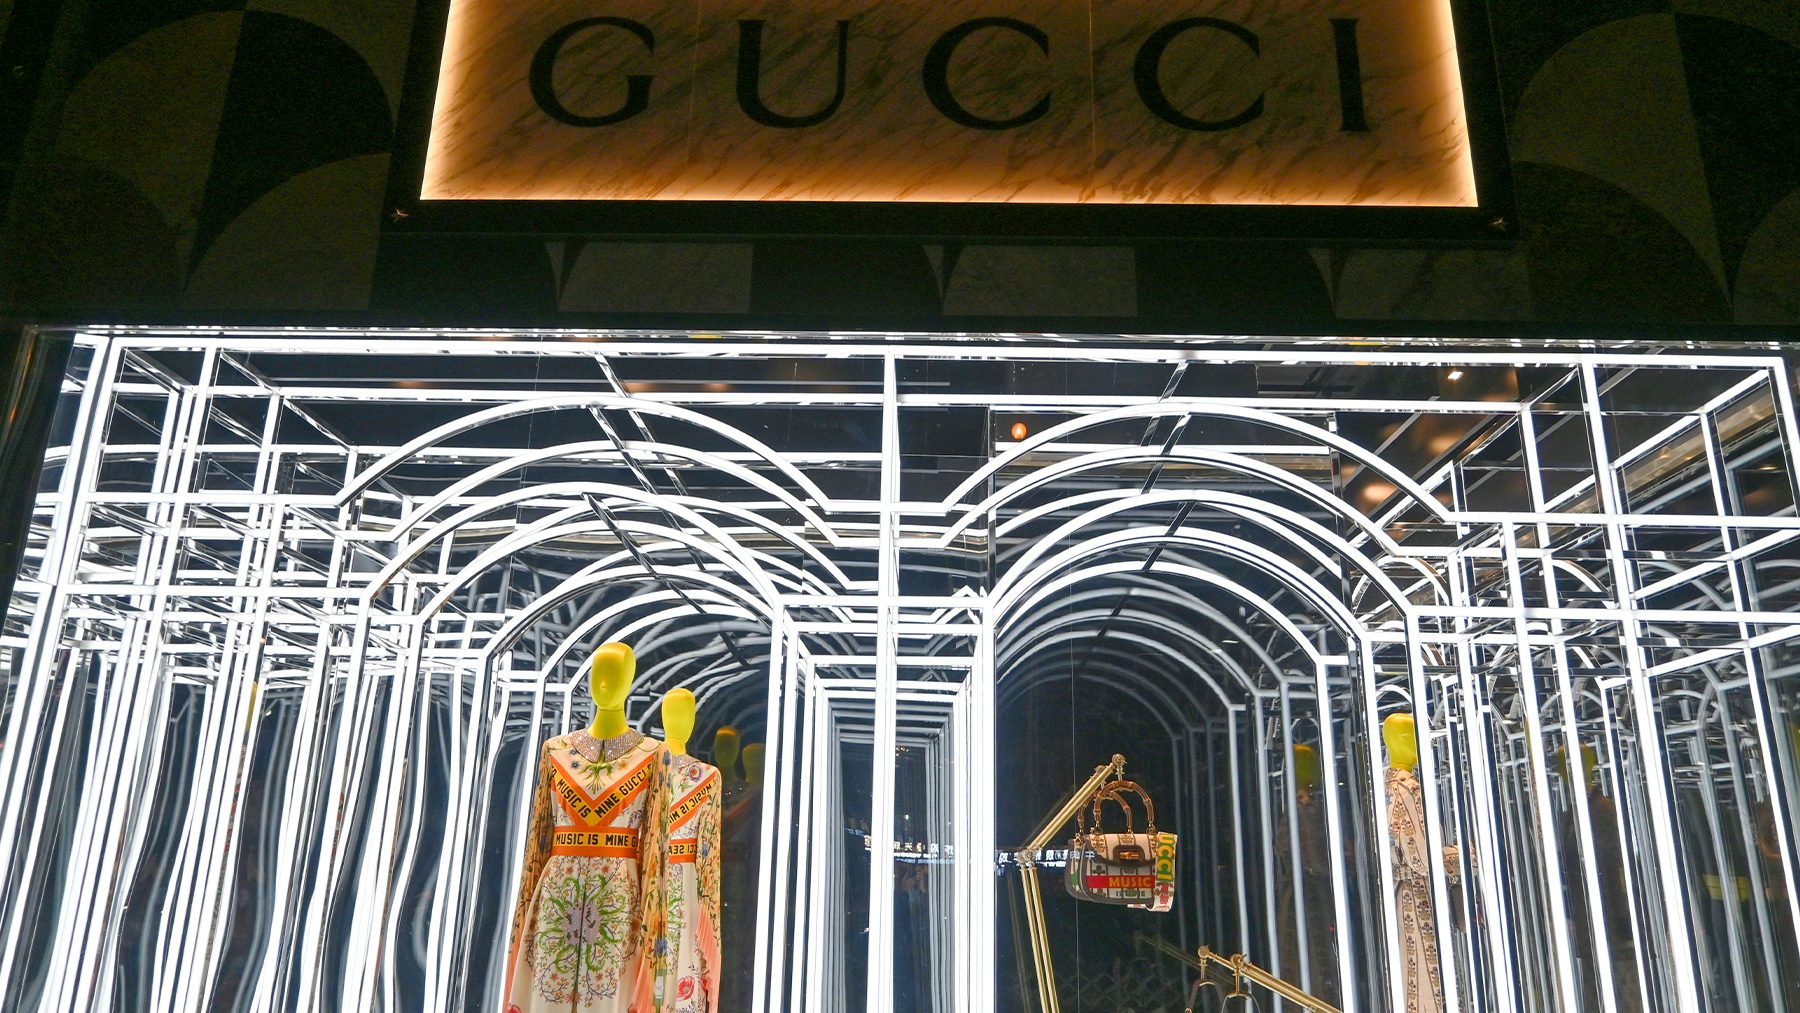 Gucci misses forecasts after sales growth slows. Getty Images.